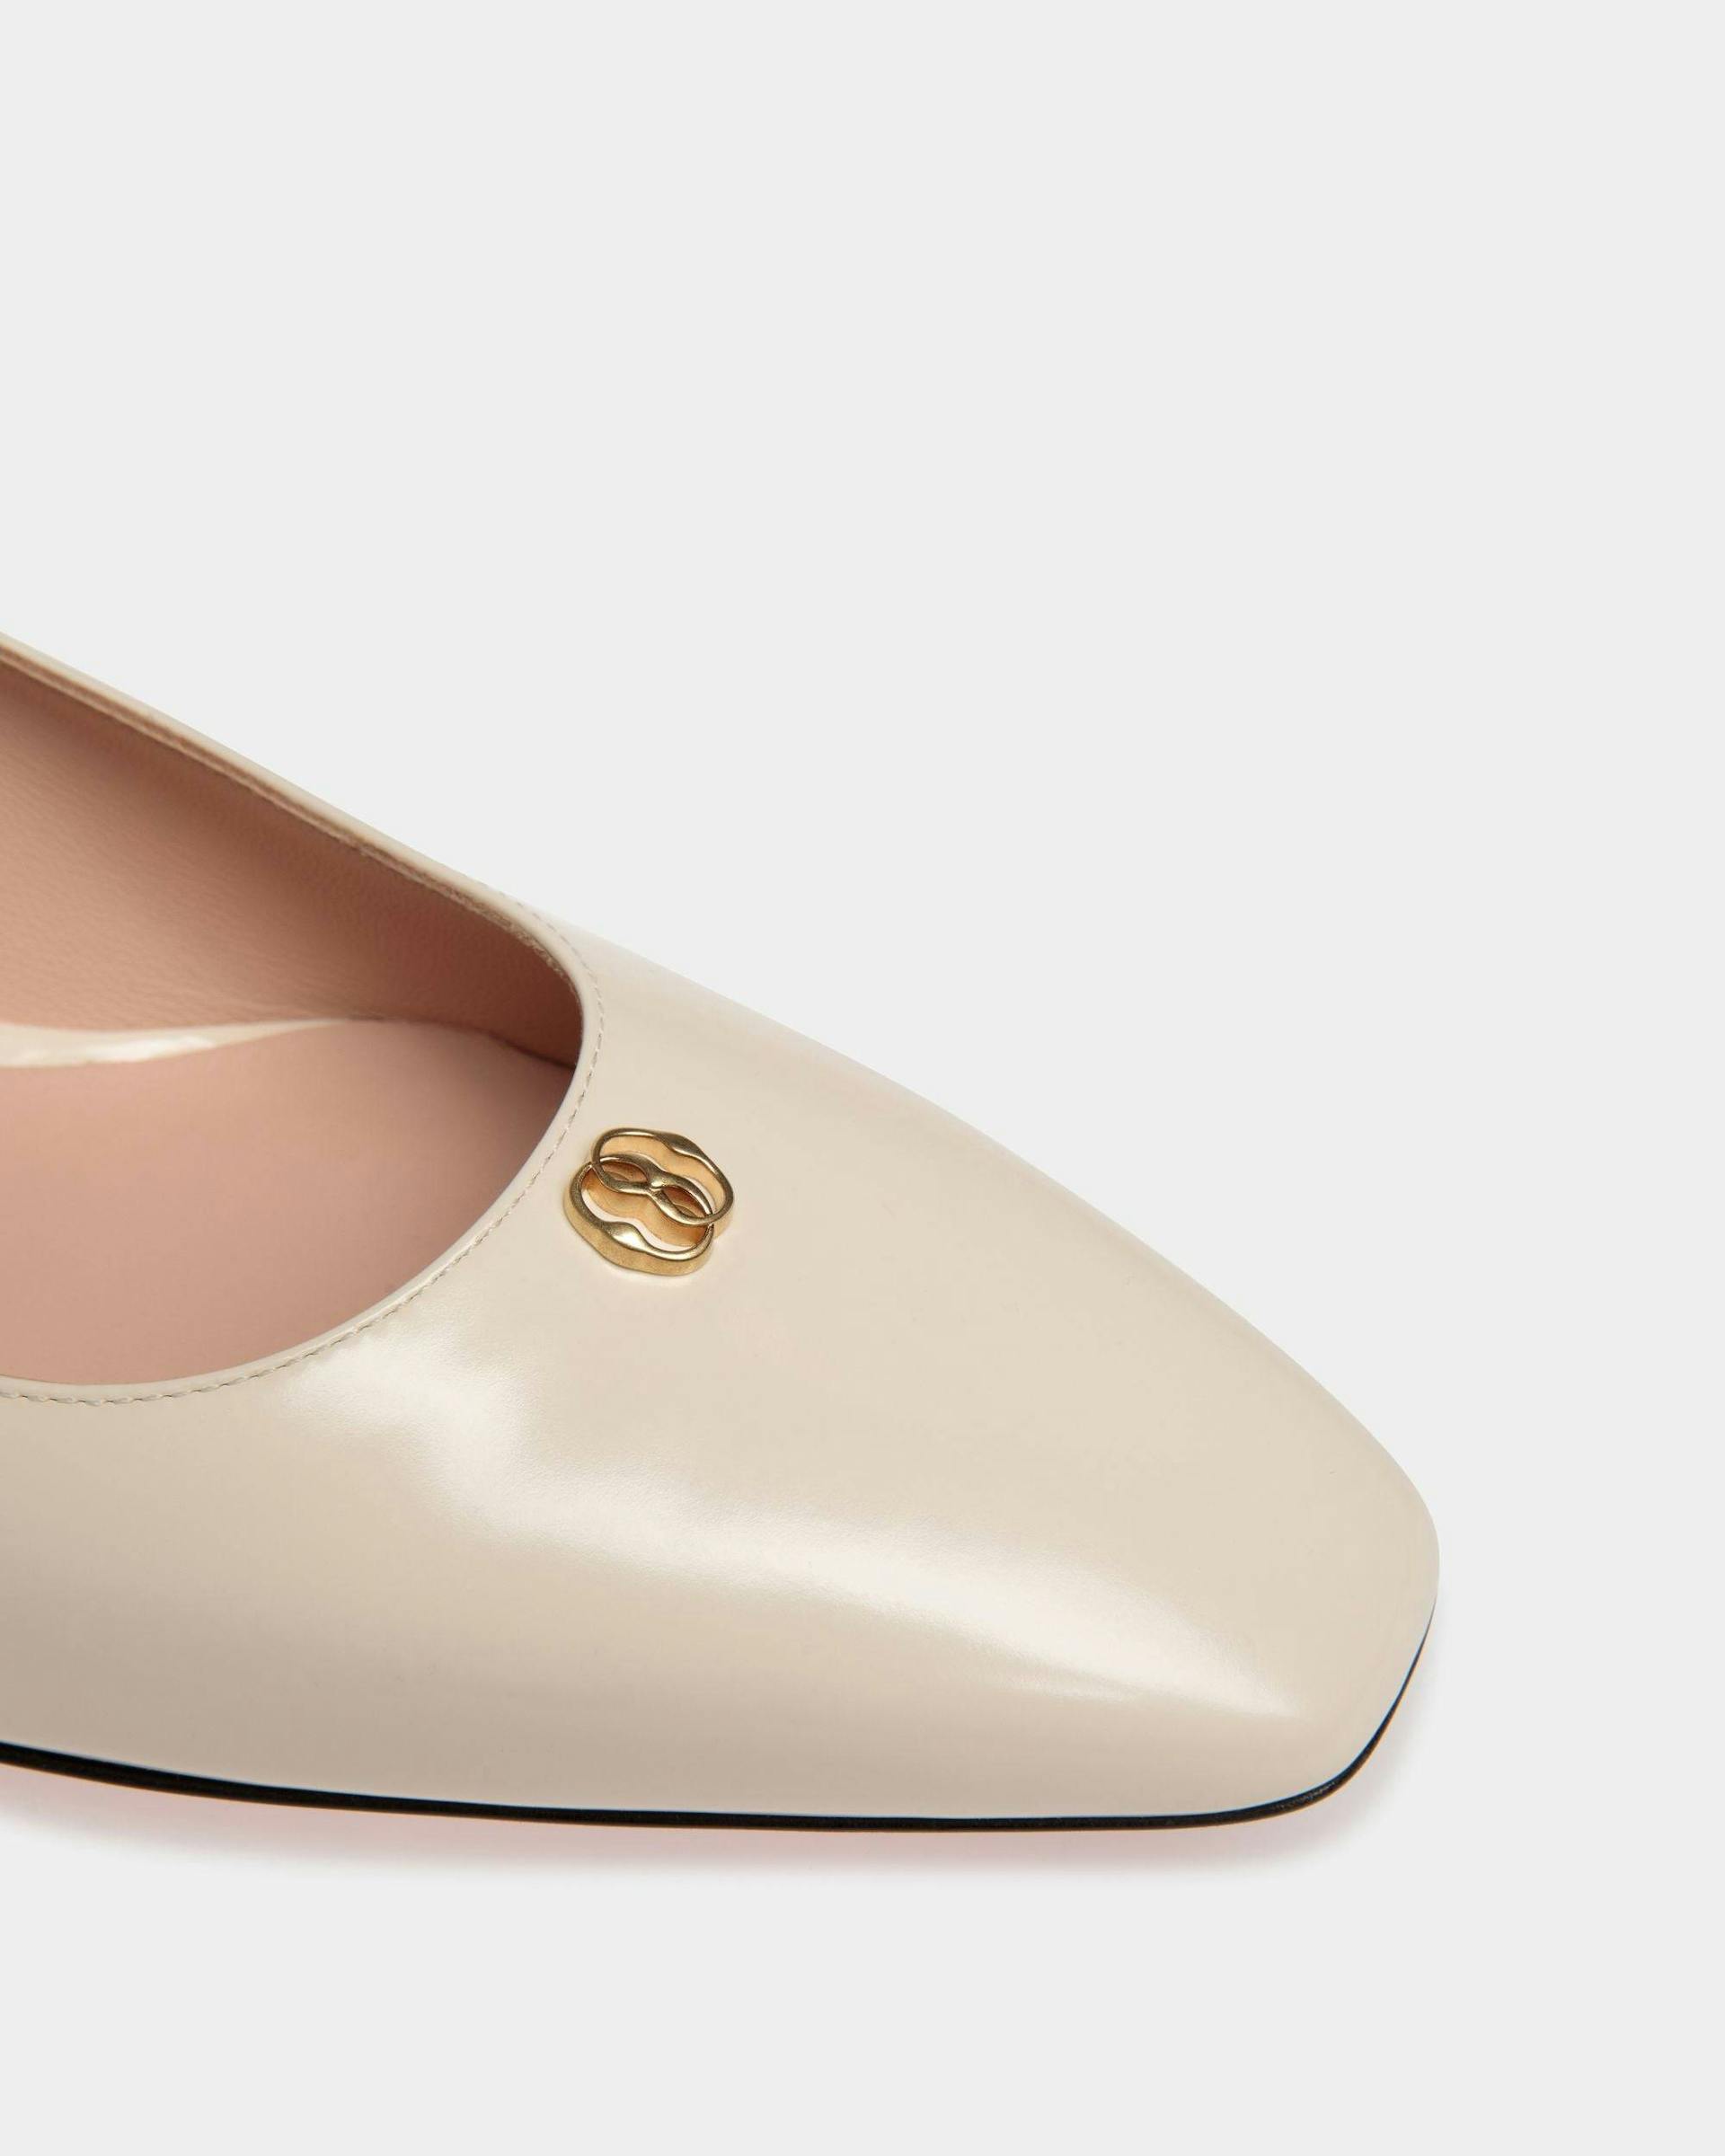 Women's Sylt Pump In White Leather | Bally | Still Life Detail